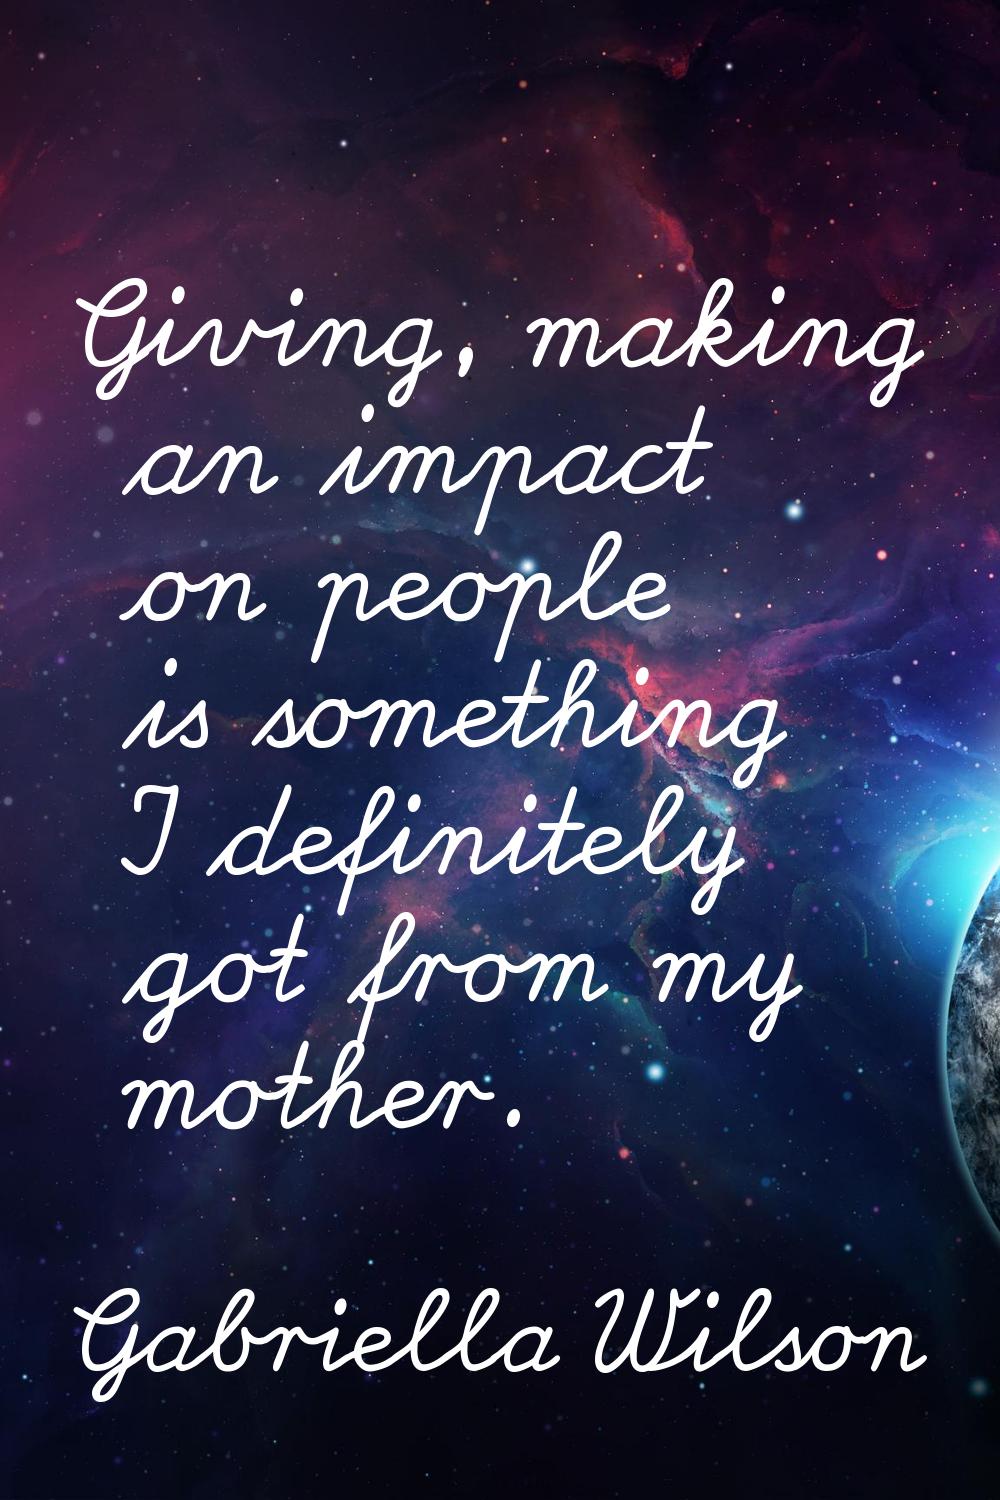 Giving, making an impact on people is something I definitely got from my mother.